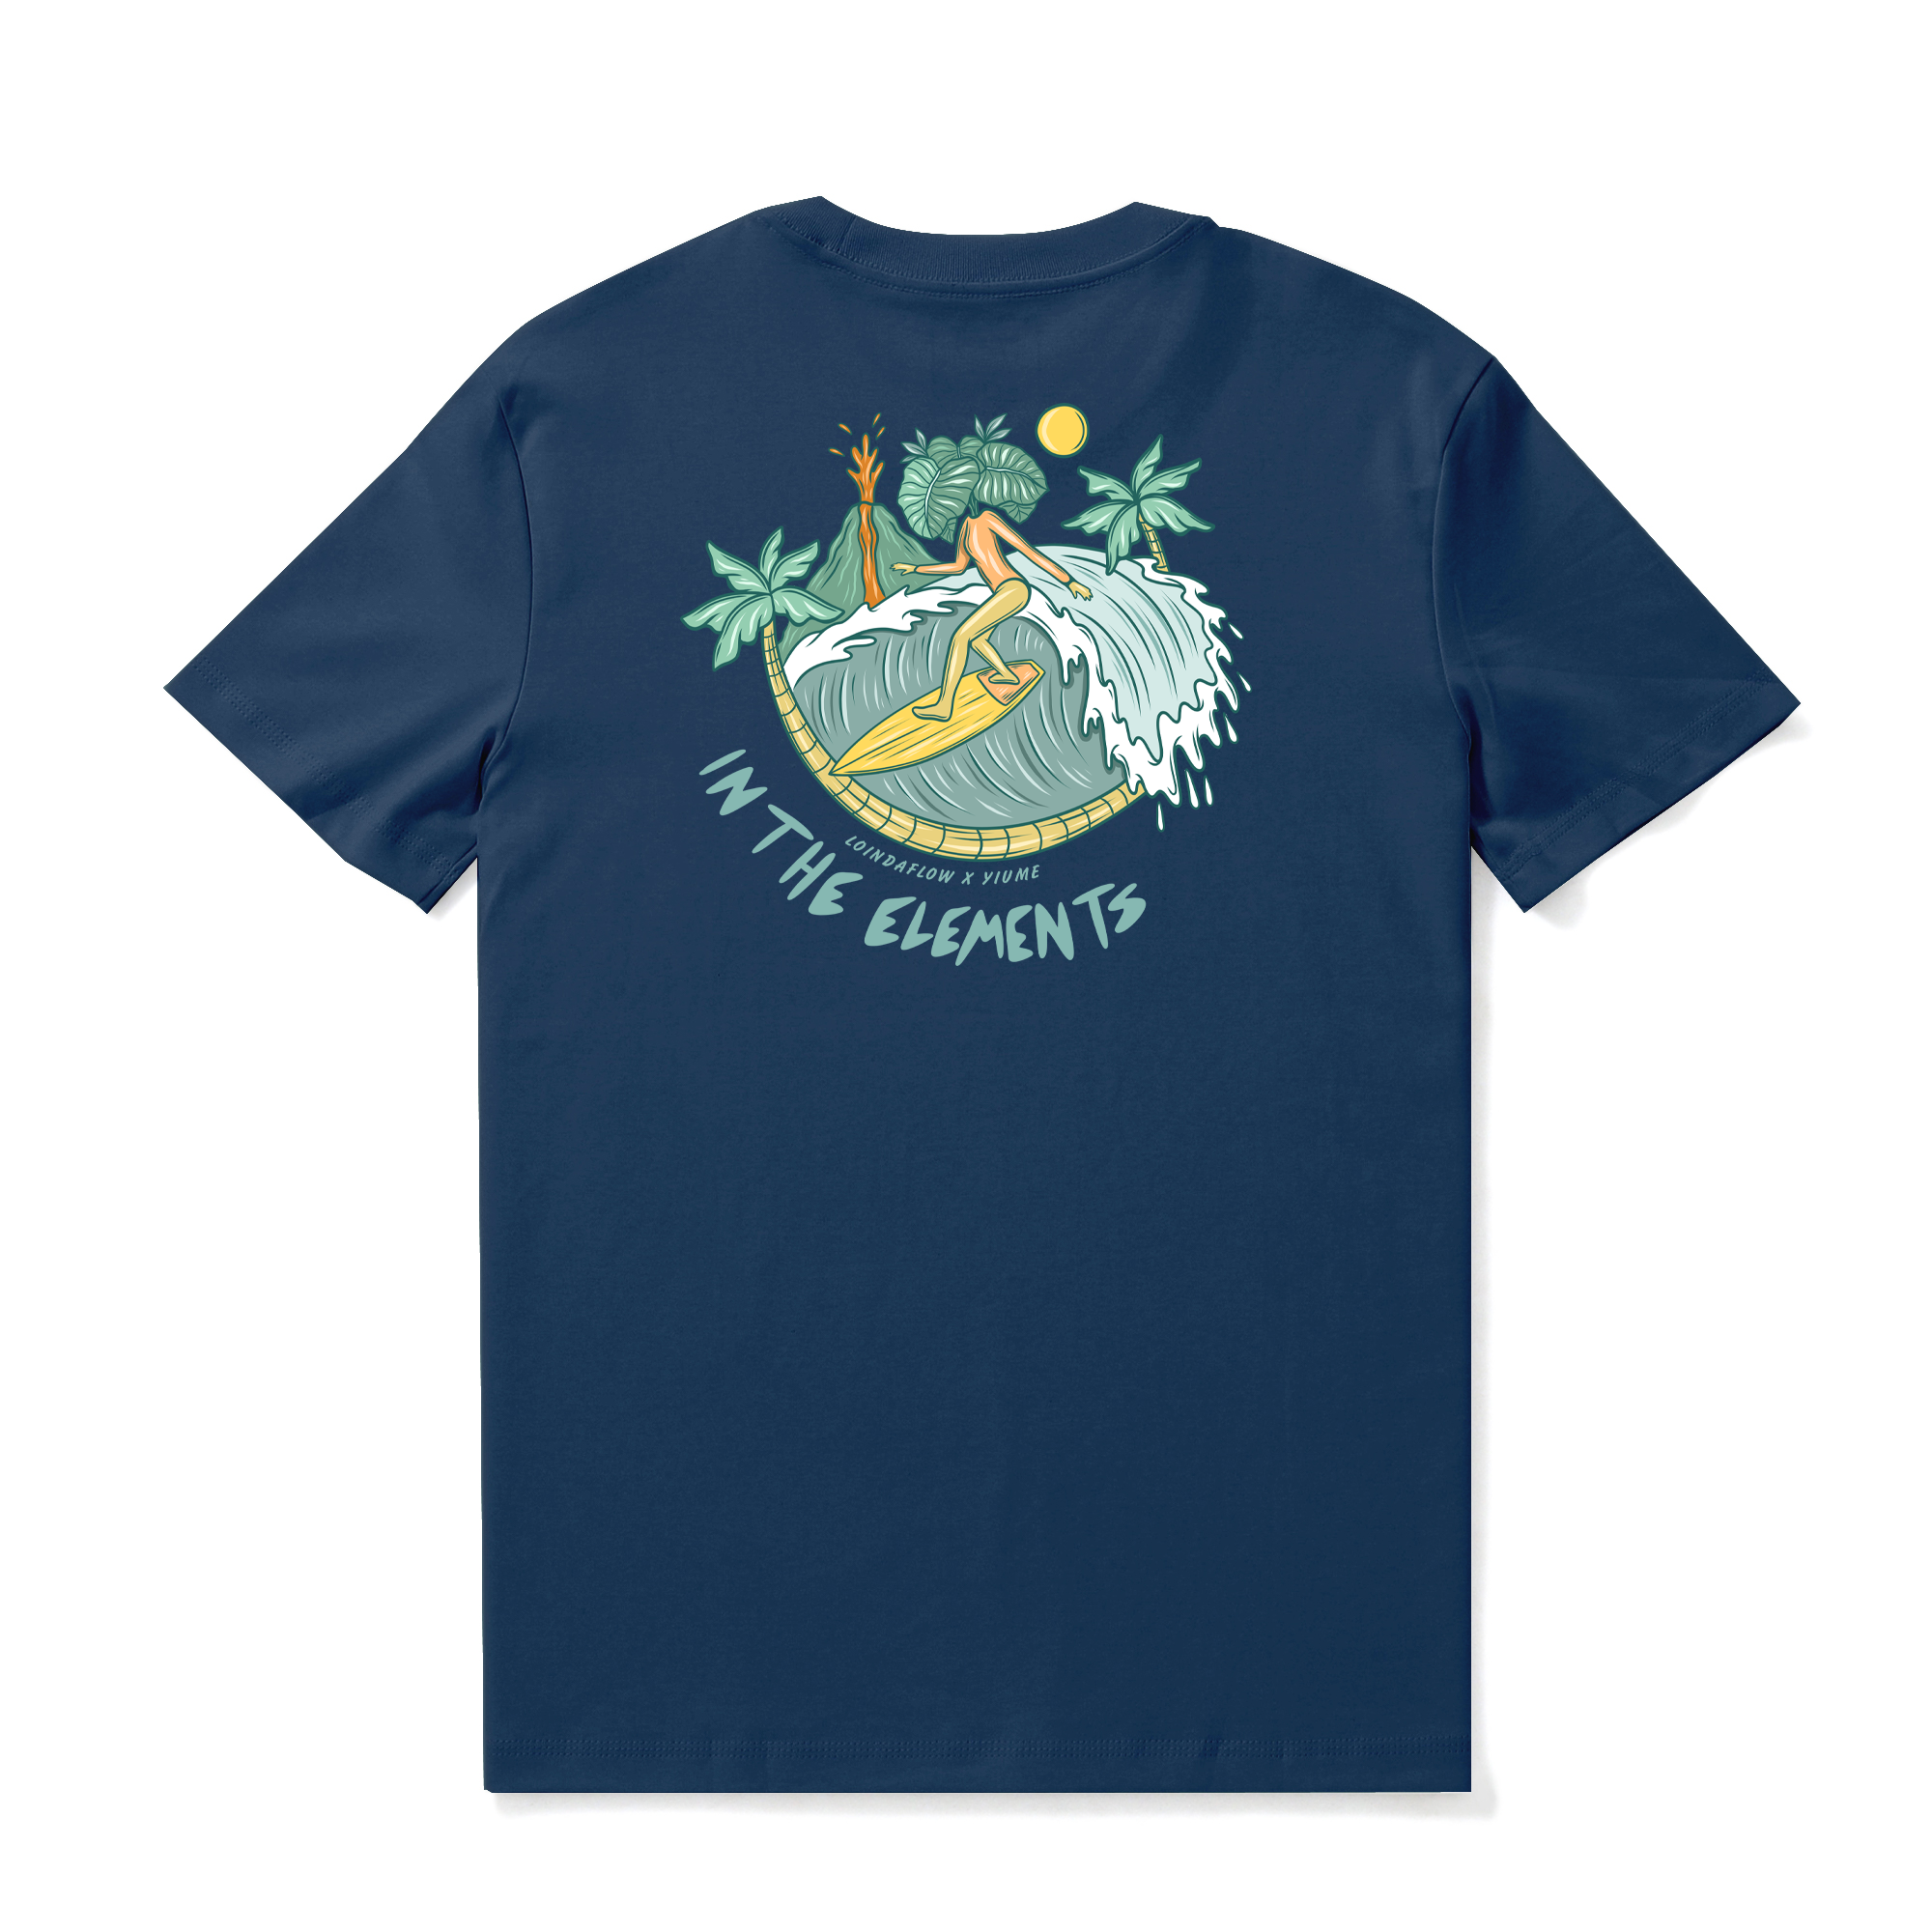 Hawaiian Tee For Men In the Elements By Loindaflow Tee Crew Neck 100% Cotton - NAVY BLUE